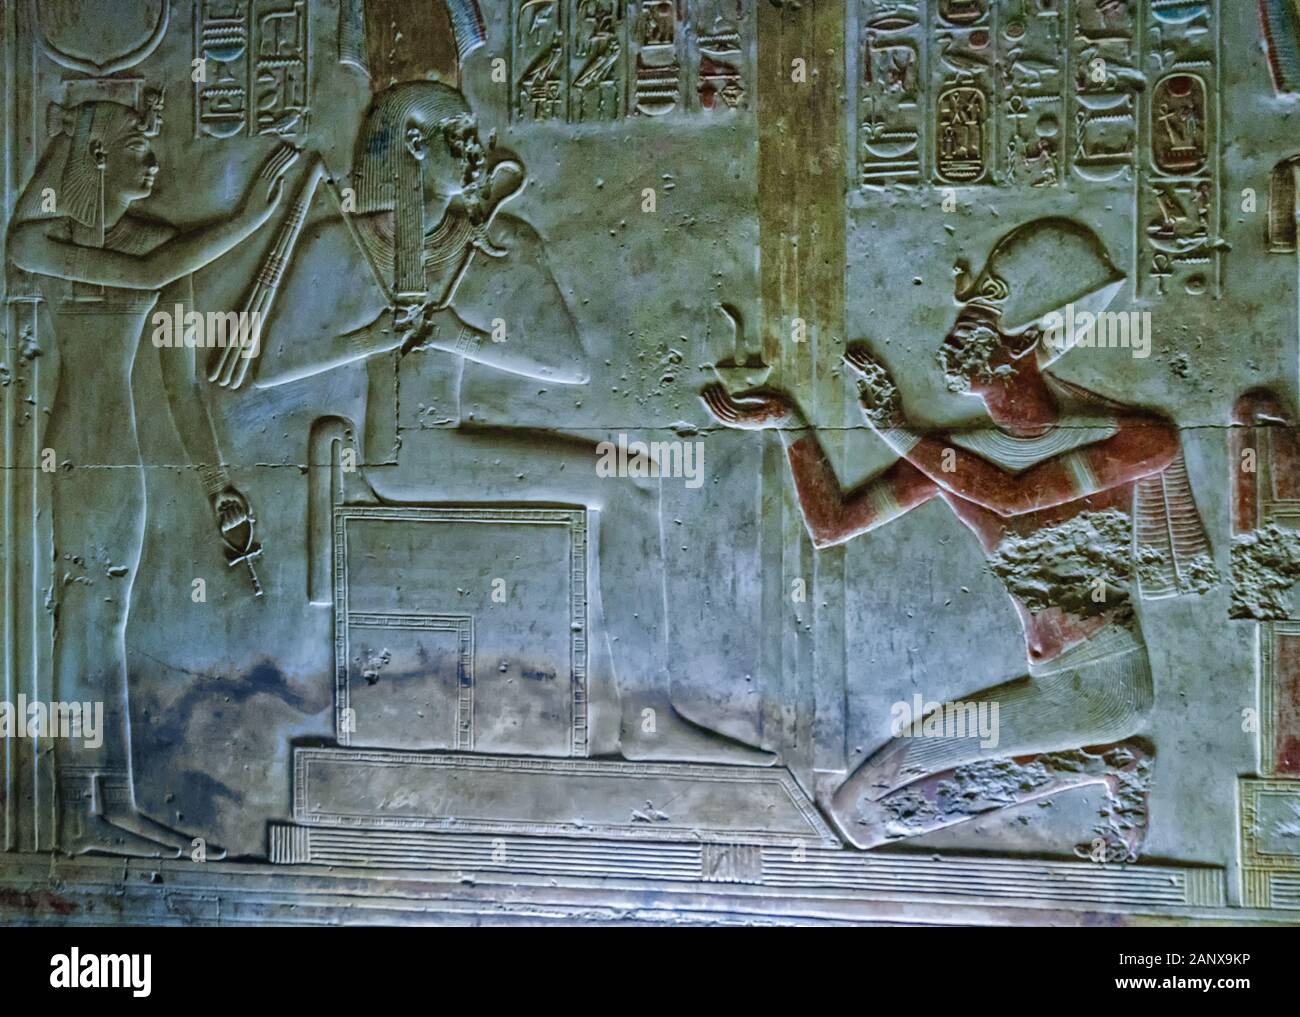 A frieze of Pharaoh Seti worshiping Osiris, from the North wall of the Chapel of Osiris at the Abydos Temple of King Seti I Stock Photo